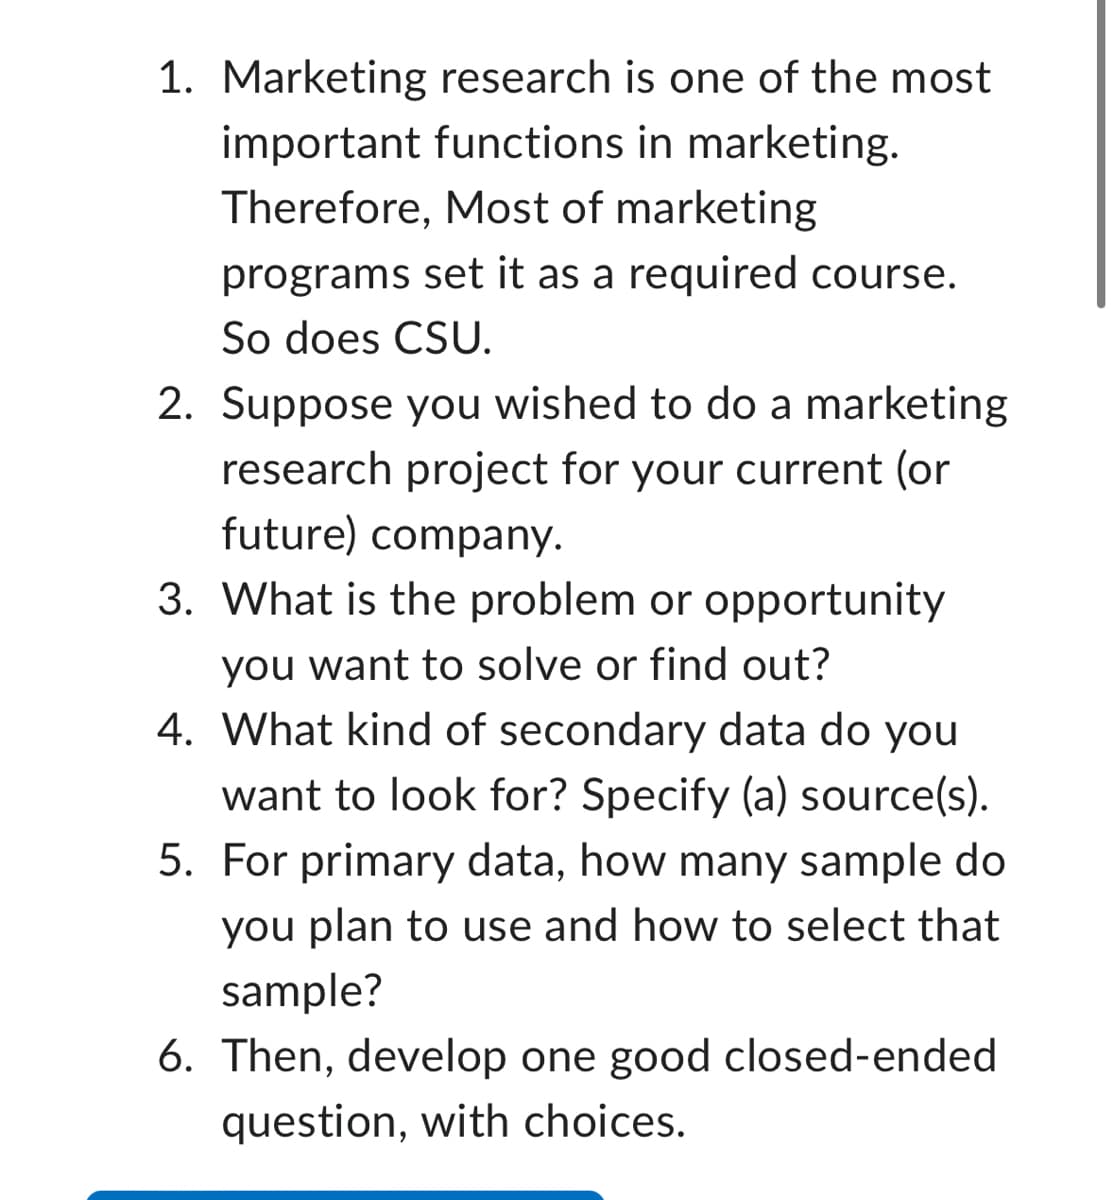 1. Marketing research is one of the most
important functions in marketing.
Therefore, Most of marketing
programs set it as a required course.
So does CSU.
2. Suppose you wished to do a marketing
research project for your current (or
future) company.
3. What is the problem or opportunity
you want to solve or find out?
4. What kind of secondary data do you
want to look for? Specify (a) source(s).
5. For primary data, how many sample do
you plan to use and how to select that
sample?
6. Then, develop one good closed-ended
question, with choices.